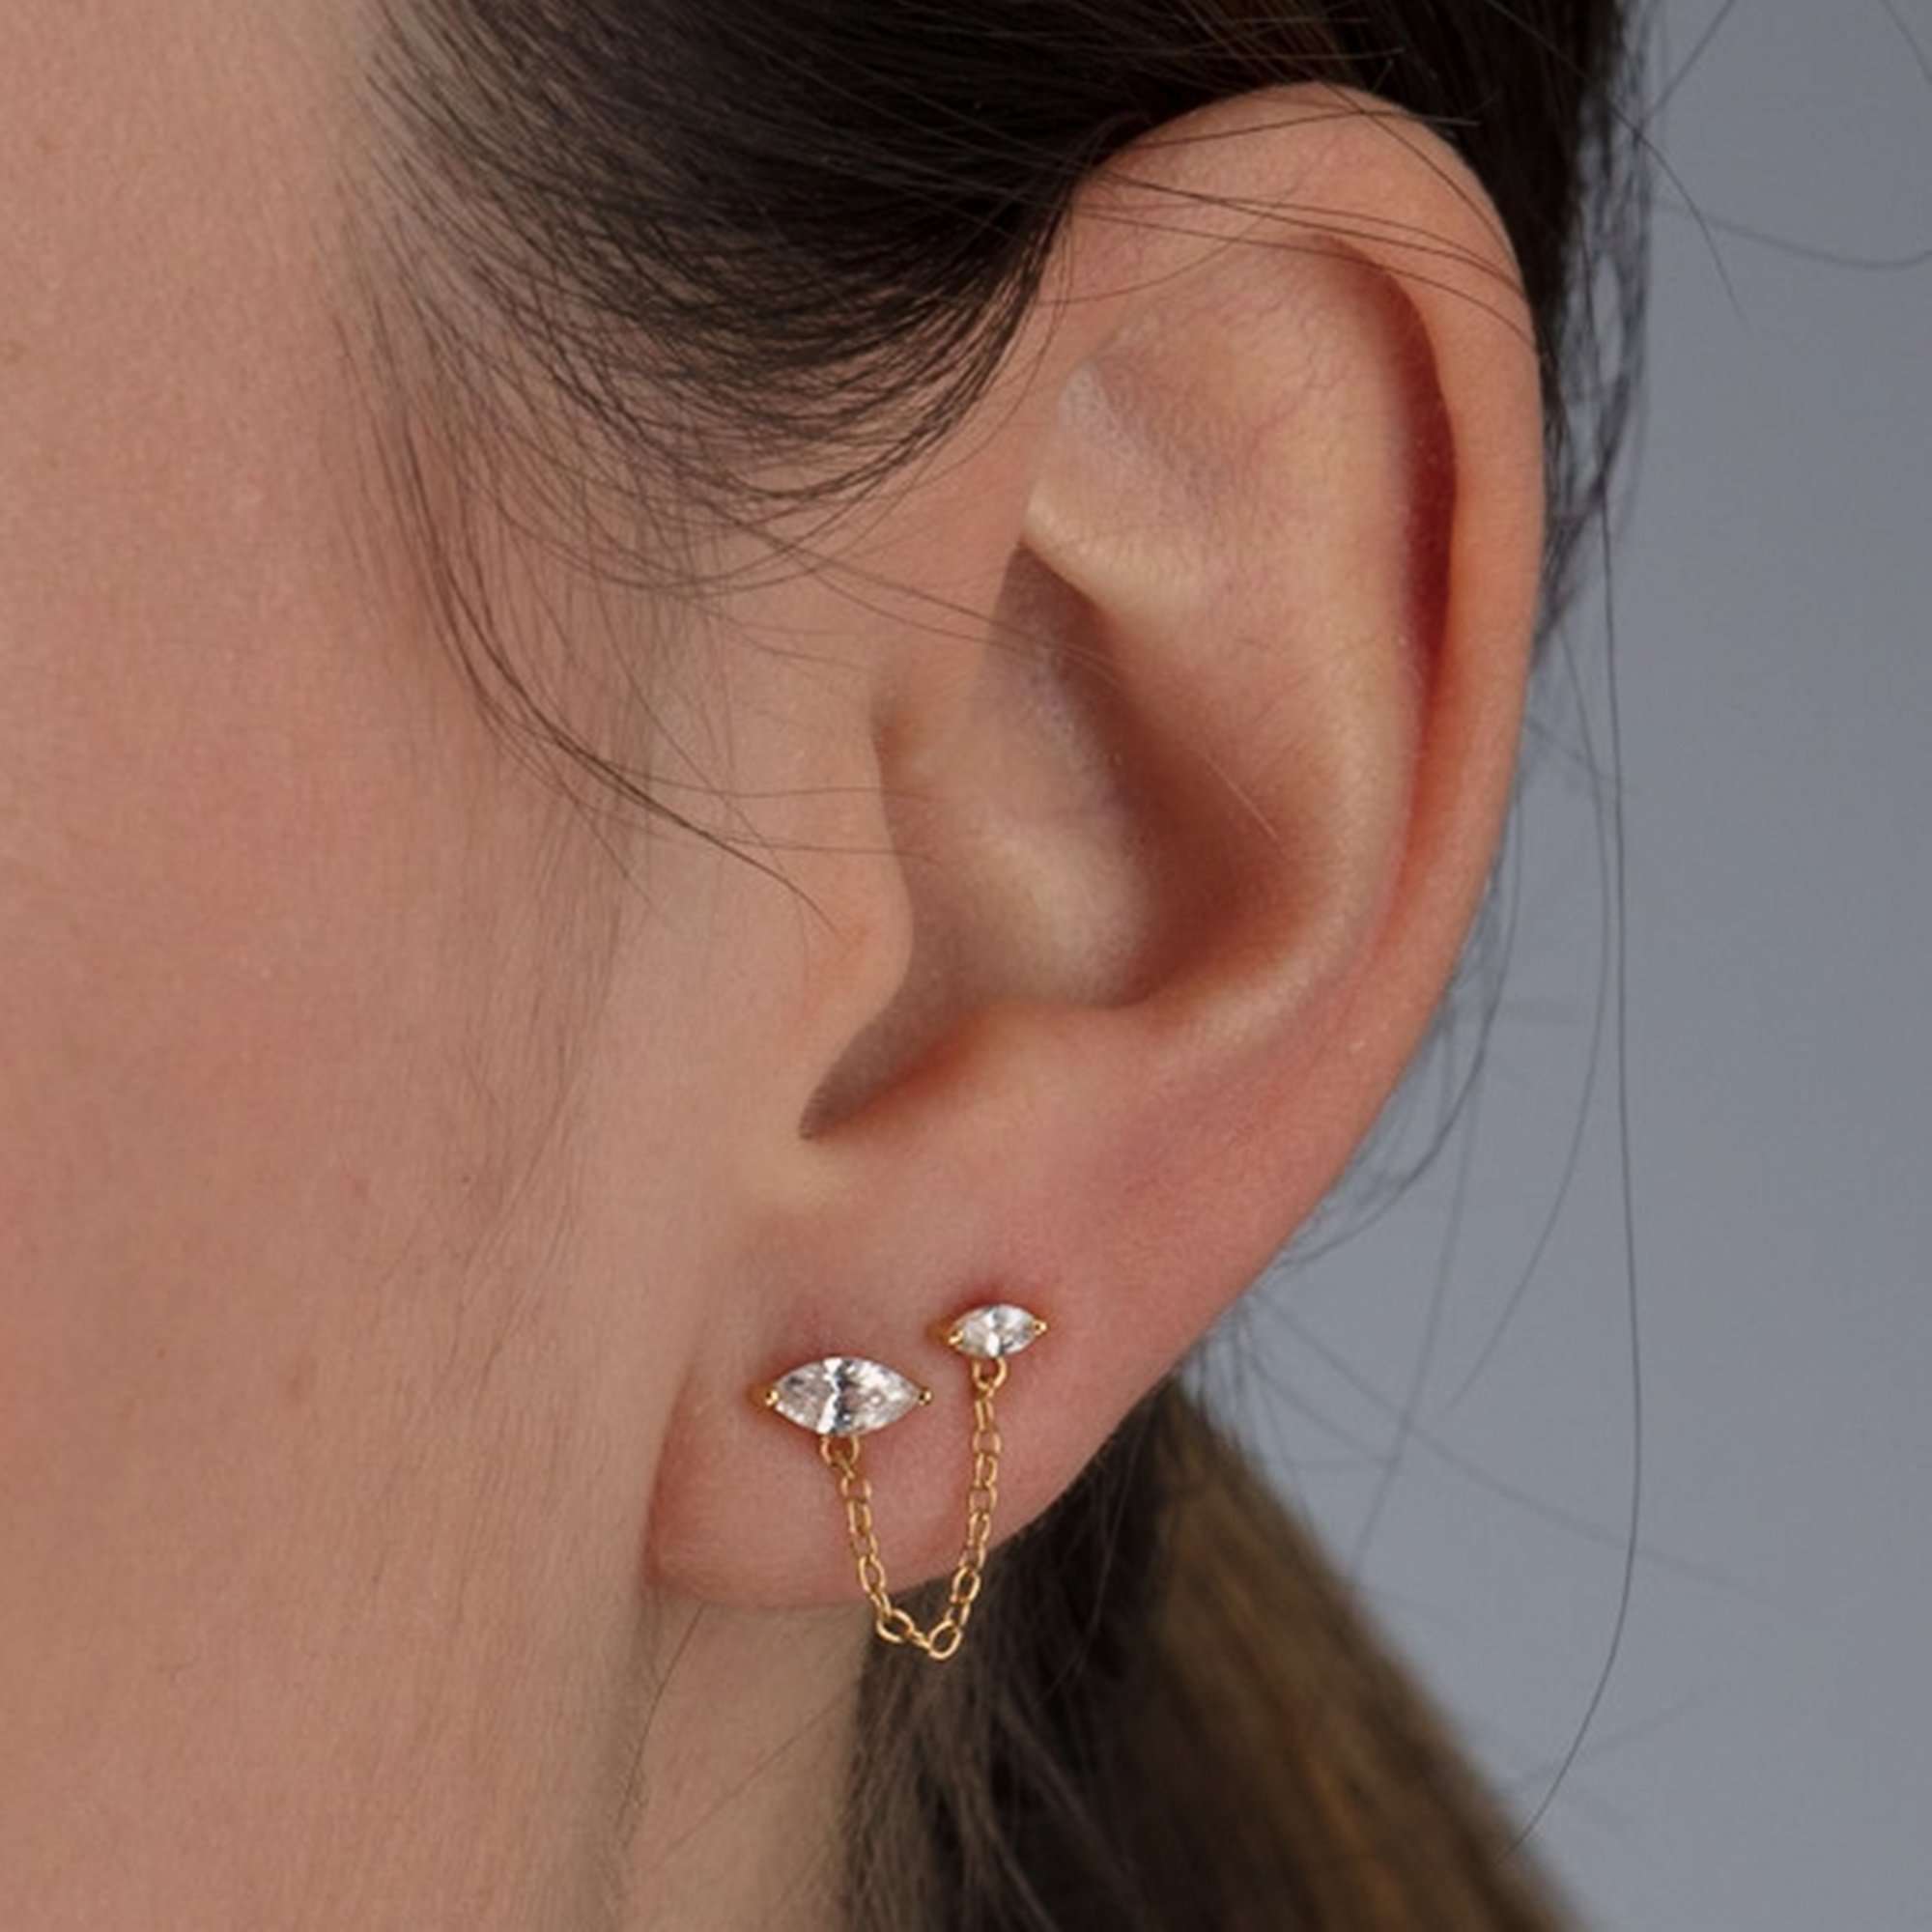  Droplet Double Stud Single Earring with Chain Connector - by Scream Pretty